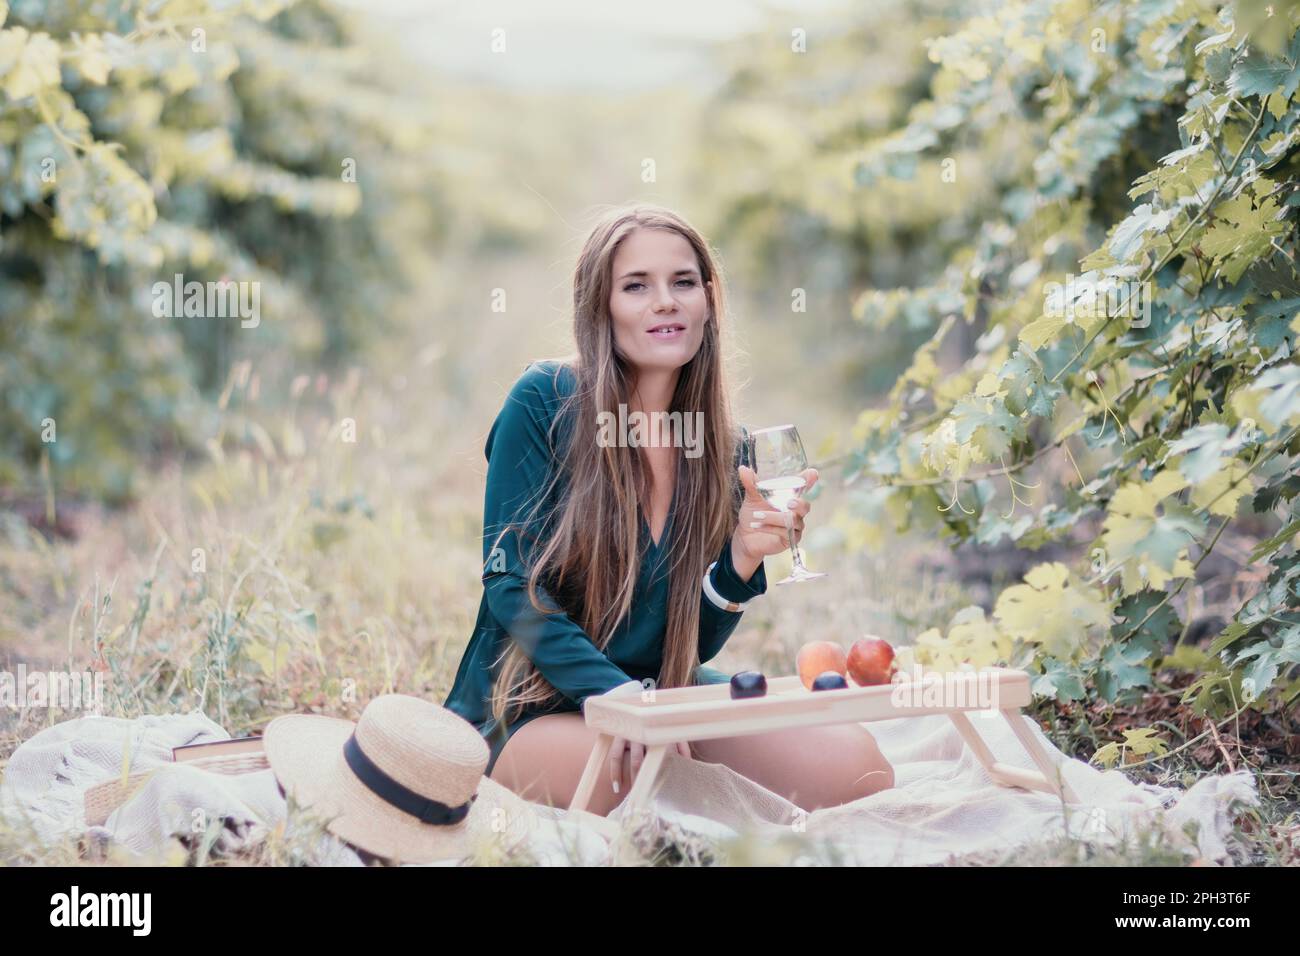 Woman picnic vineyard. Happy woman with a glass of wine at a picnic in the vineyard, wine tasting at sunset and open nature in the summer. Romantic Stock Photo